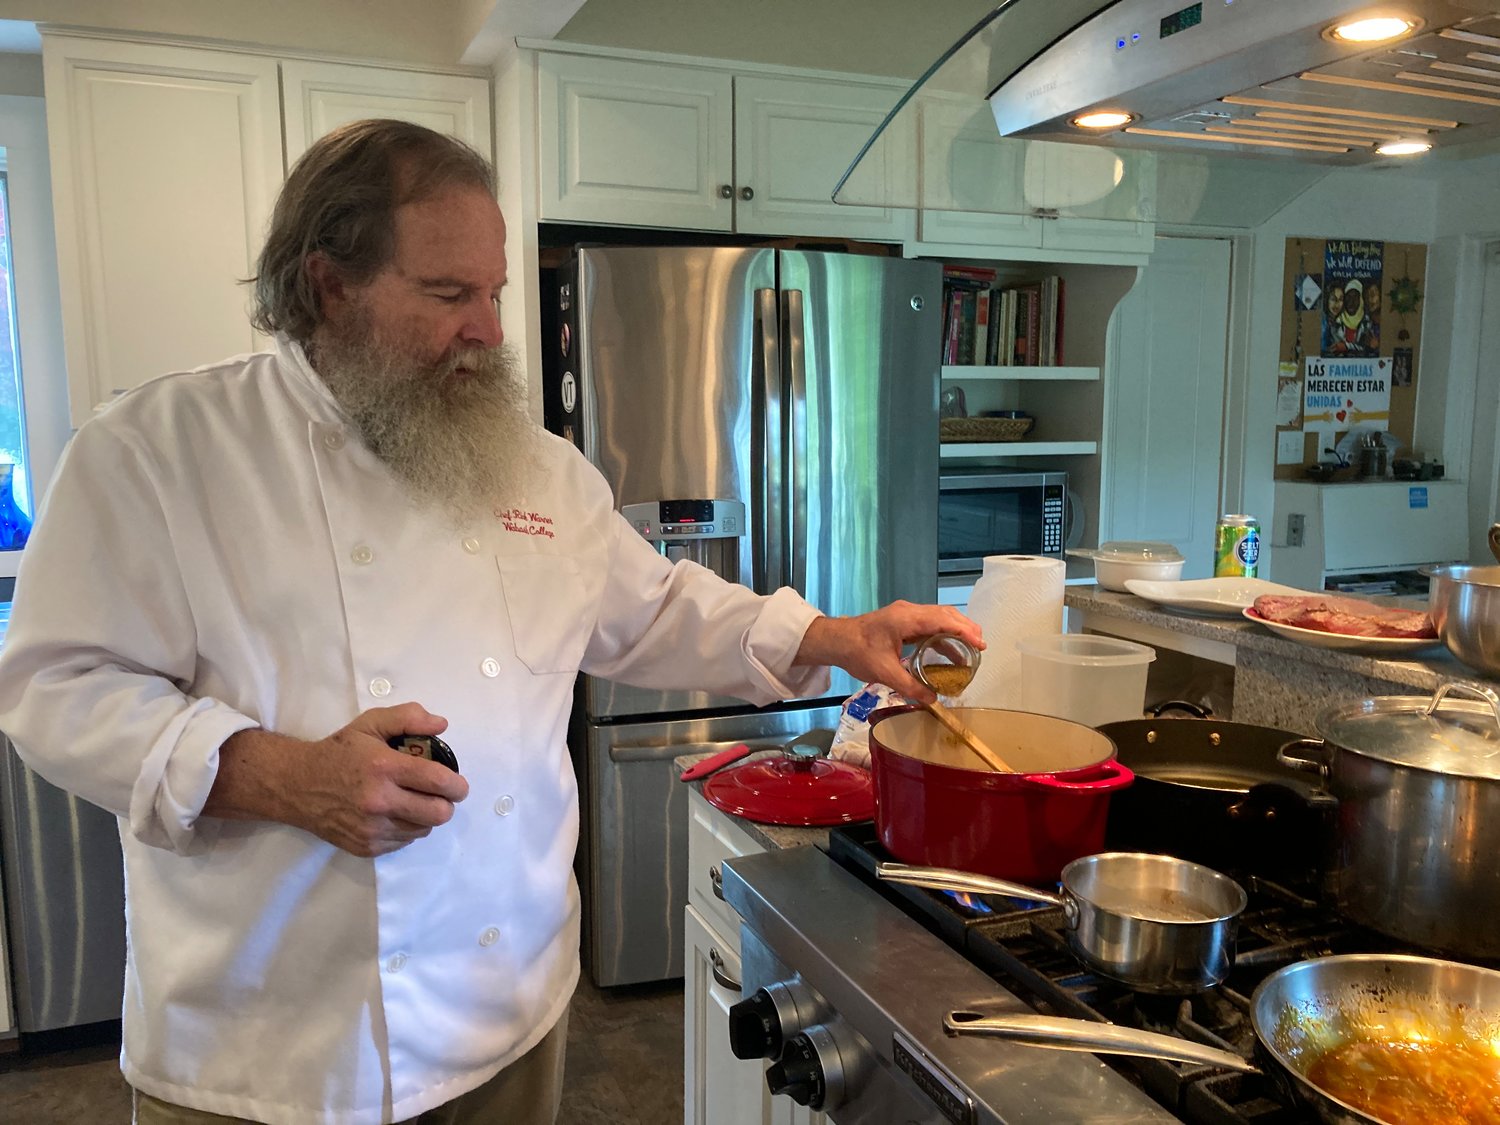 Richard Warner, a Wabash College professor and former professional chef, gives a cooking demonstration during an "After the Bell" event for college alumni.